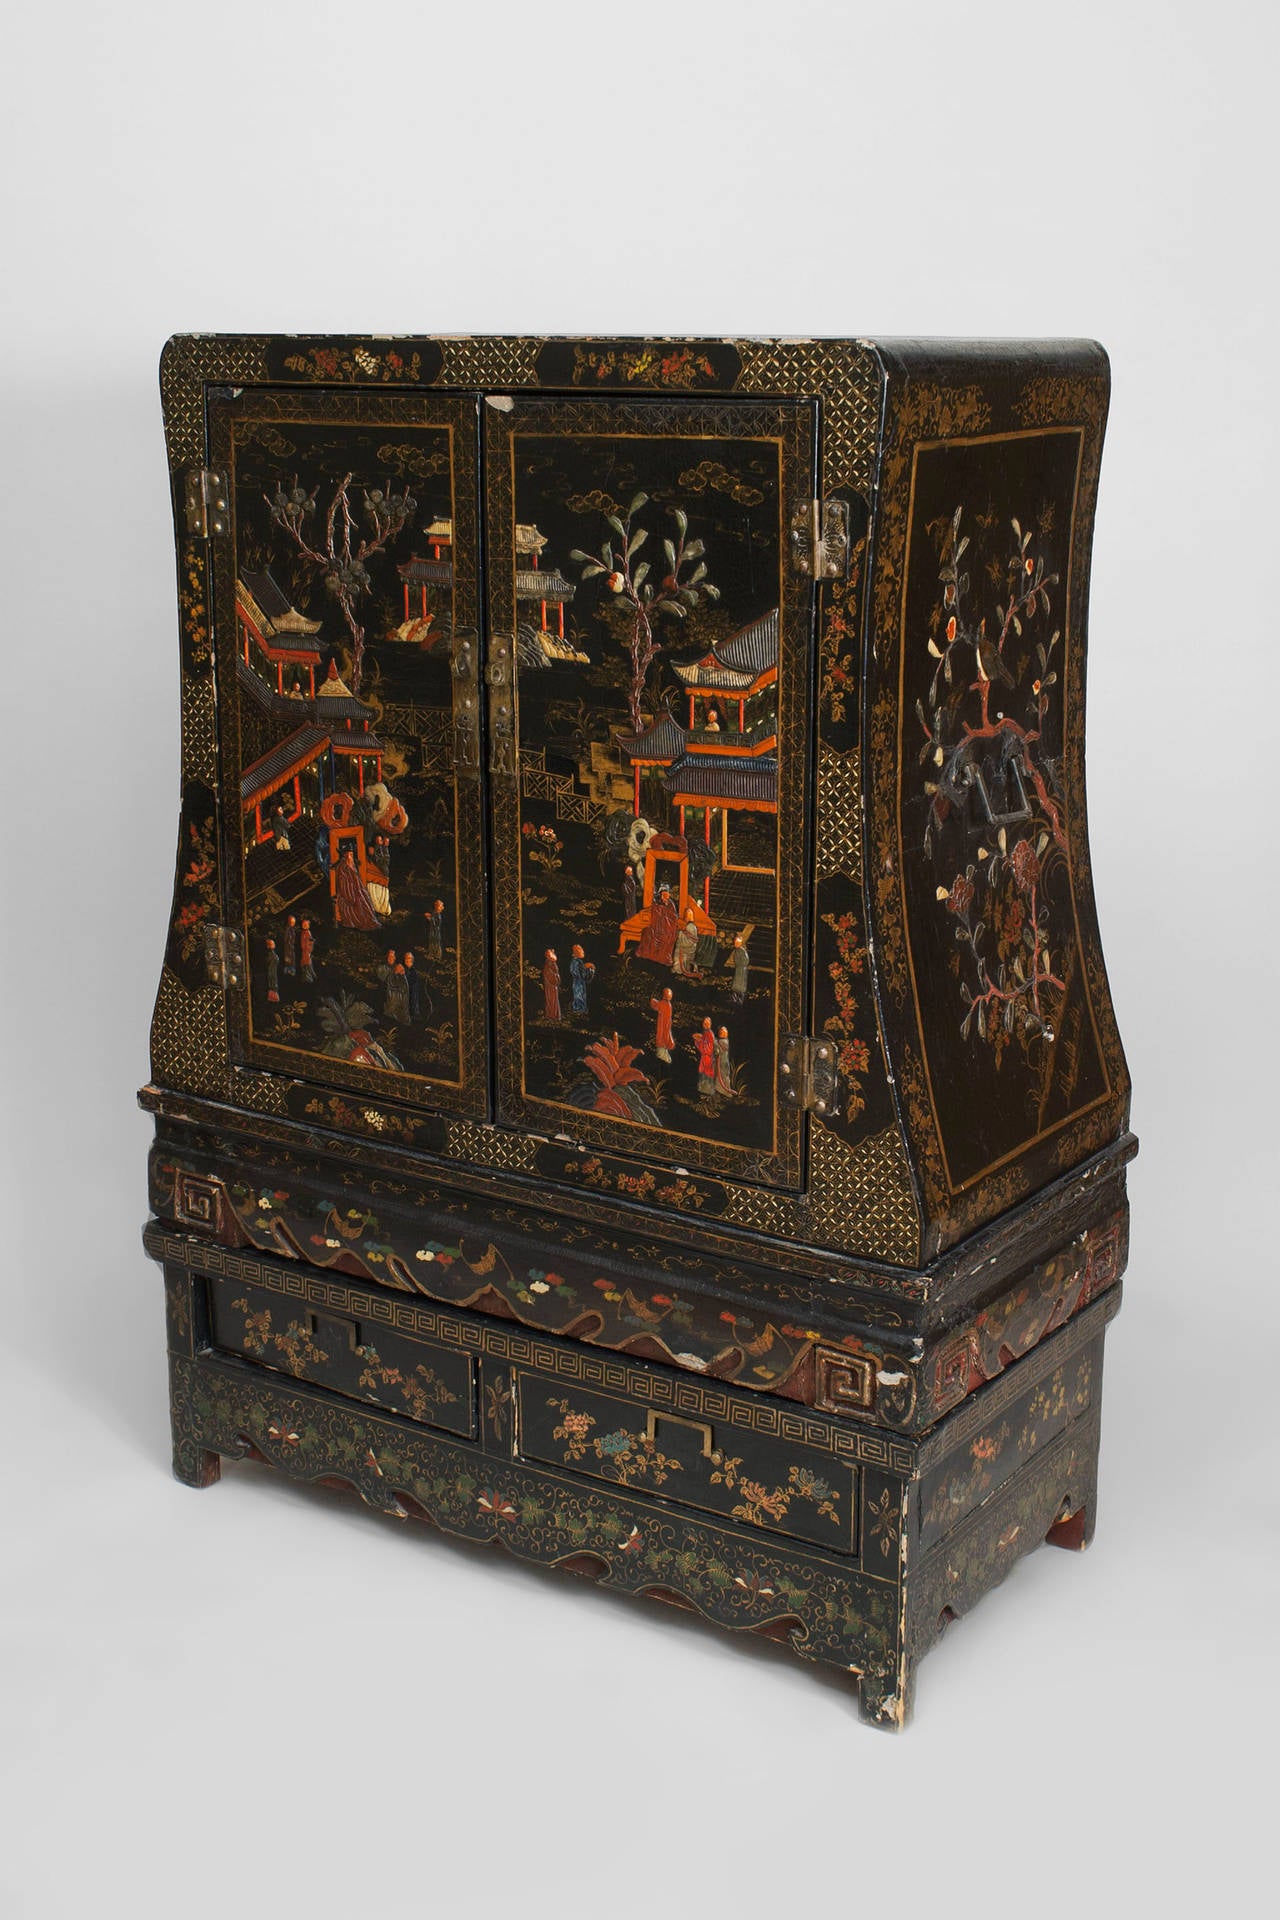 Asian Chinese style (19th Century) black lacquered and chinoiserie decorated 2 door cabinet with shaped sides and resting on a base with 2 drawers
